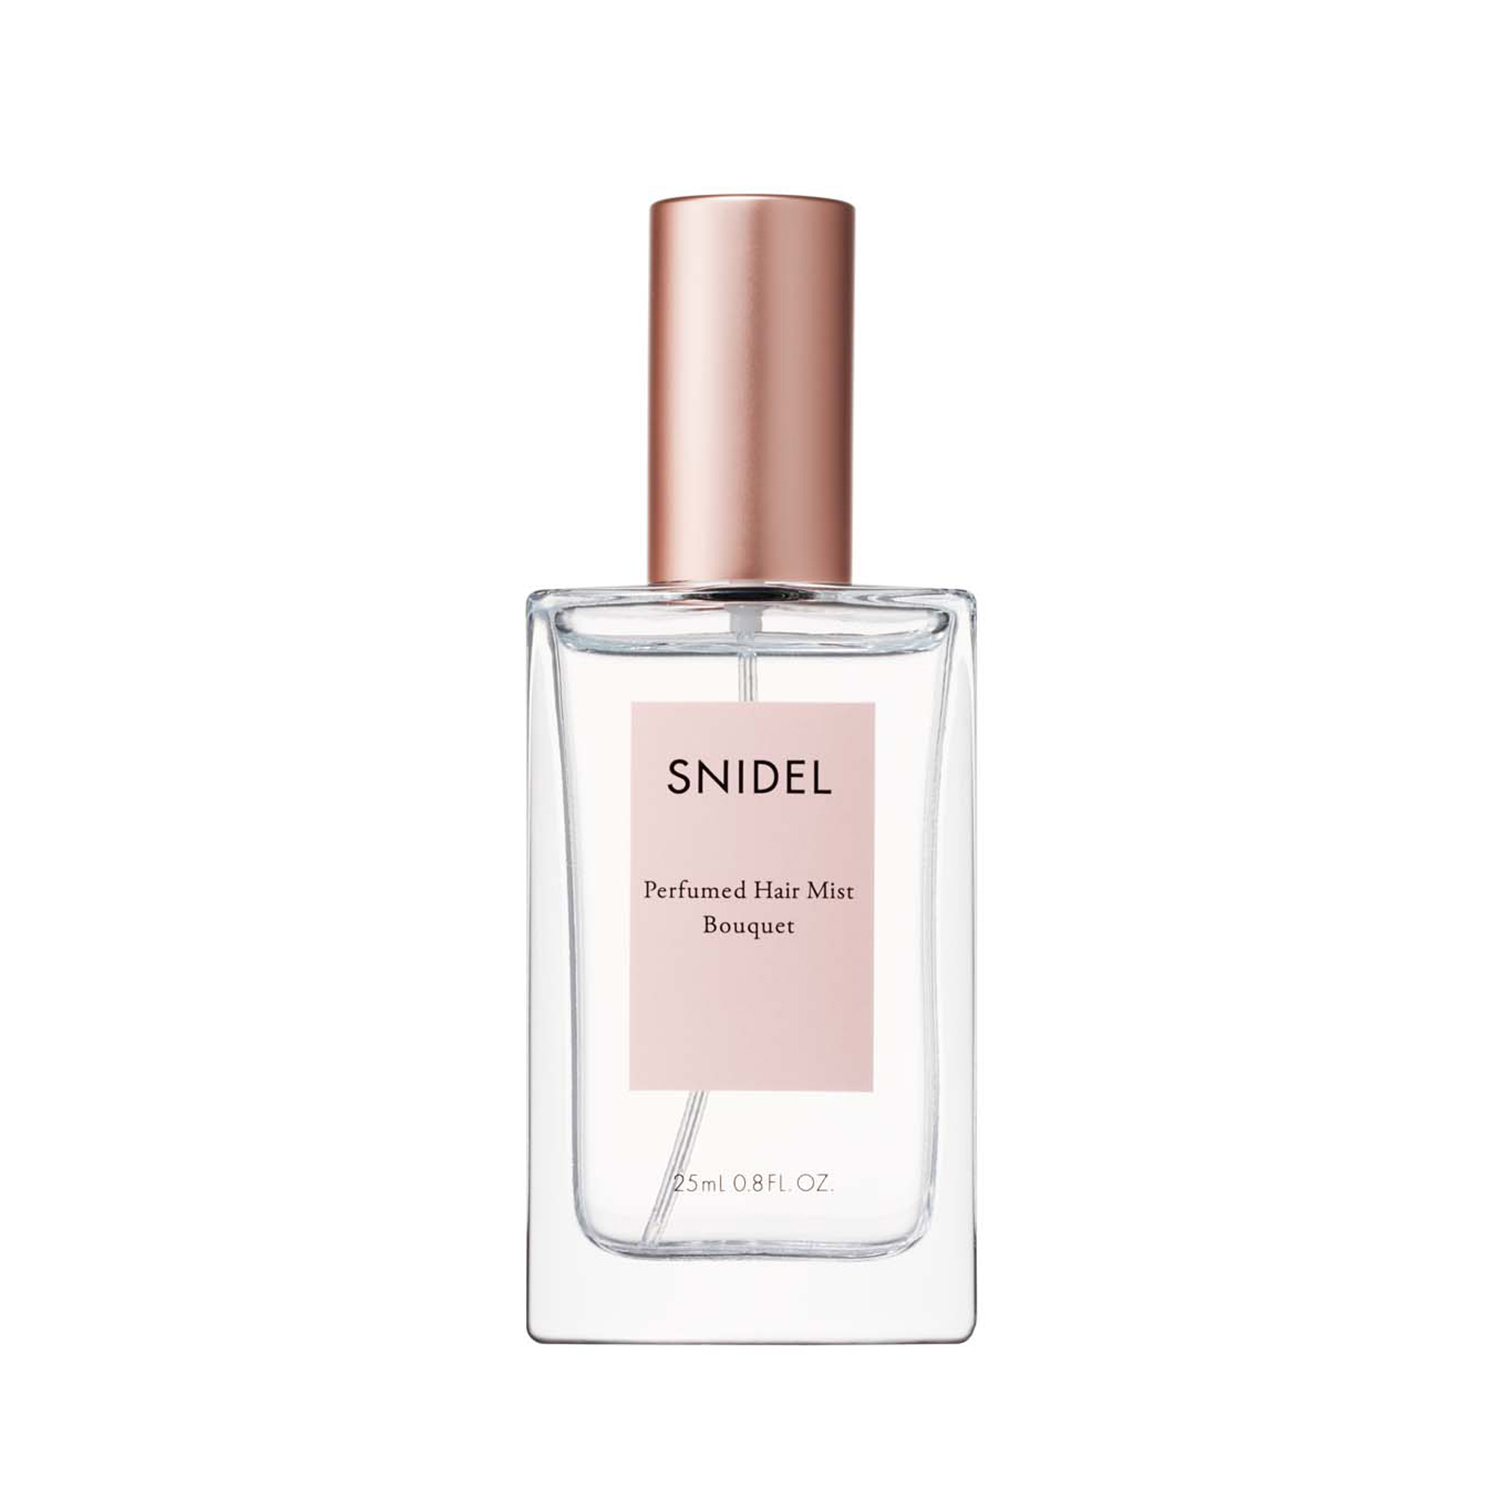 SNIDEL BEAUTY】パフュームド ヘア ミスト ブーケ ｜OTHER その他｜SNIDEL BEAUTY ONLINE STORE  スナイデル ビューティオンラインストア｜SNIDEL BEAUTY ONLINE STORE スナイデル ビューティ オンラインストア